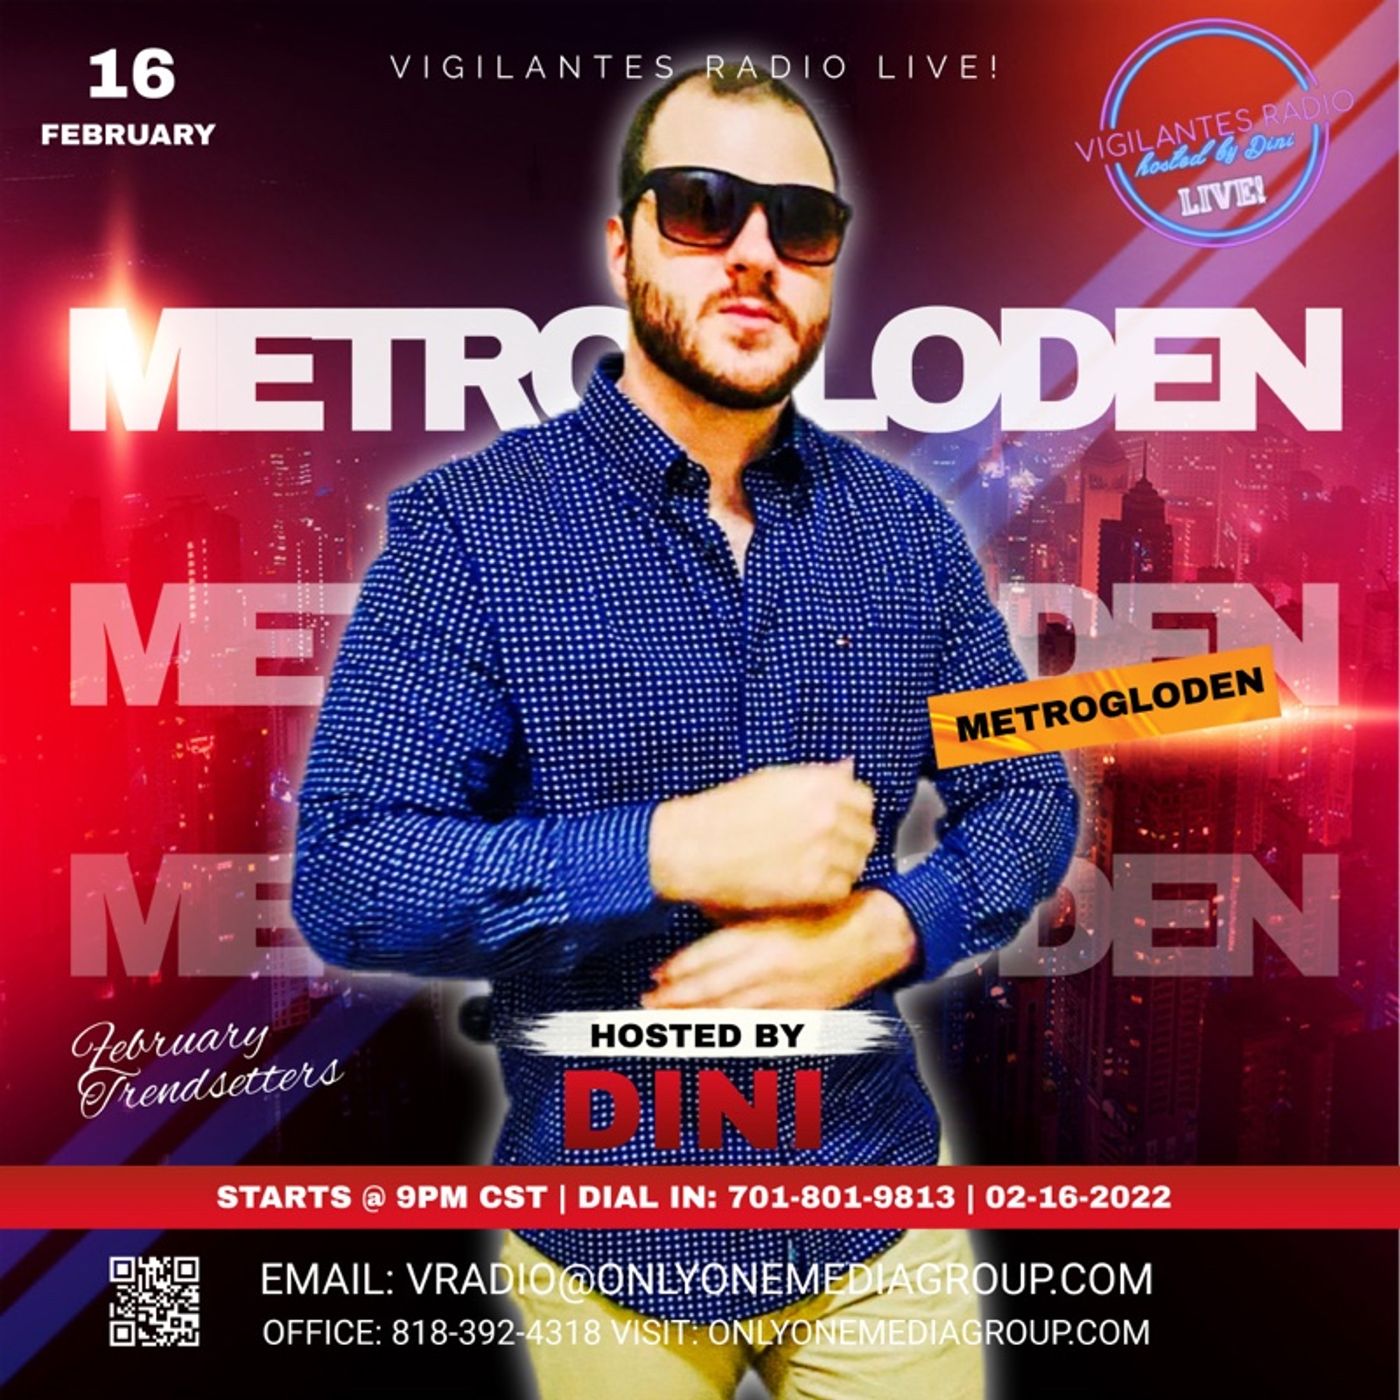 The MetroGloden Interview. Image